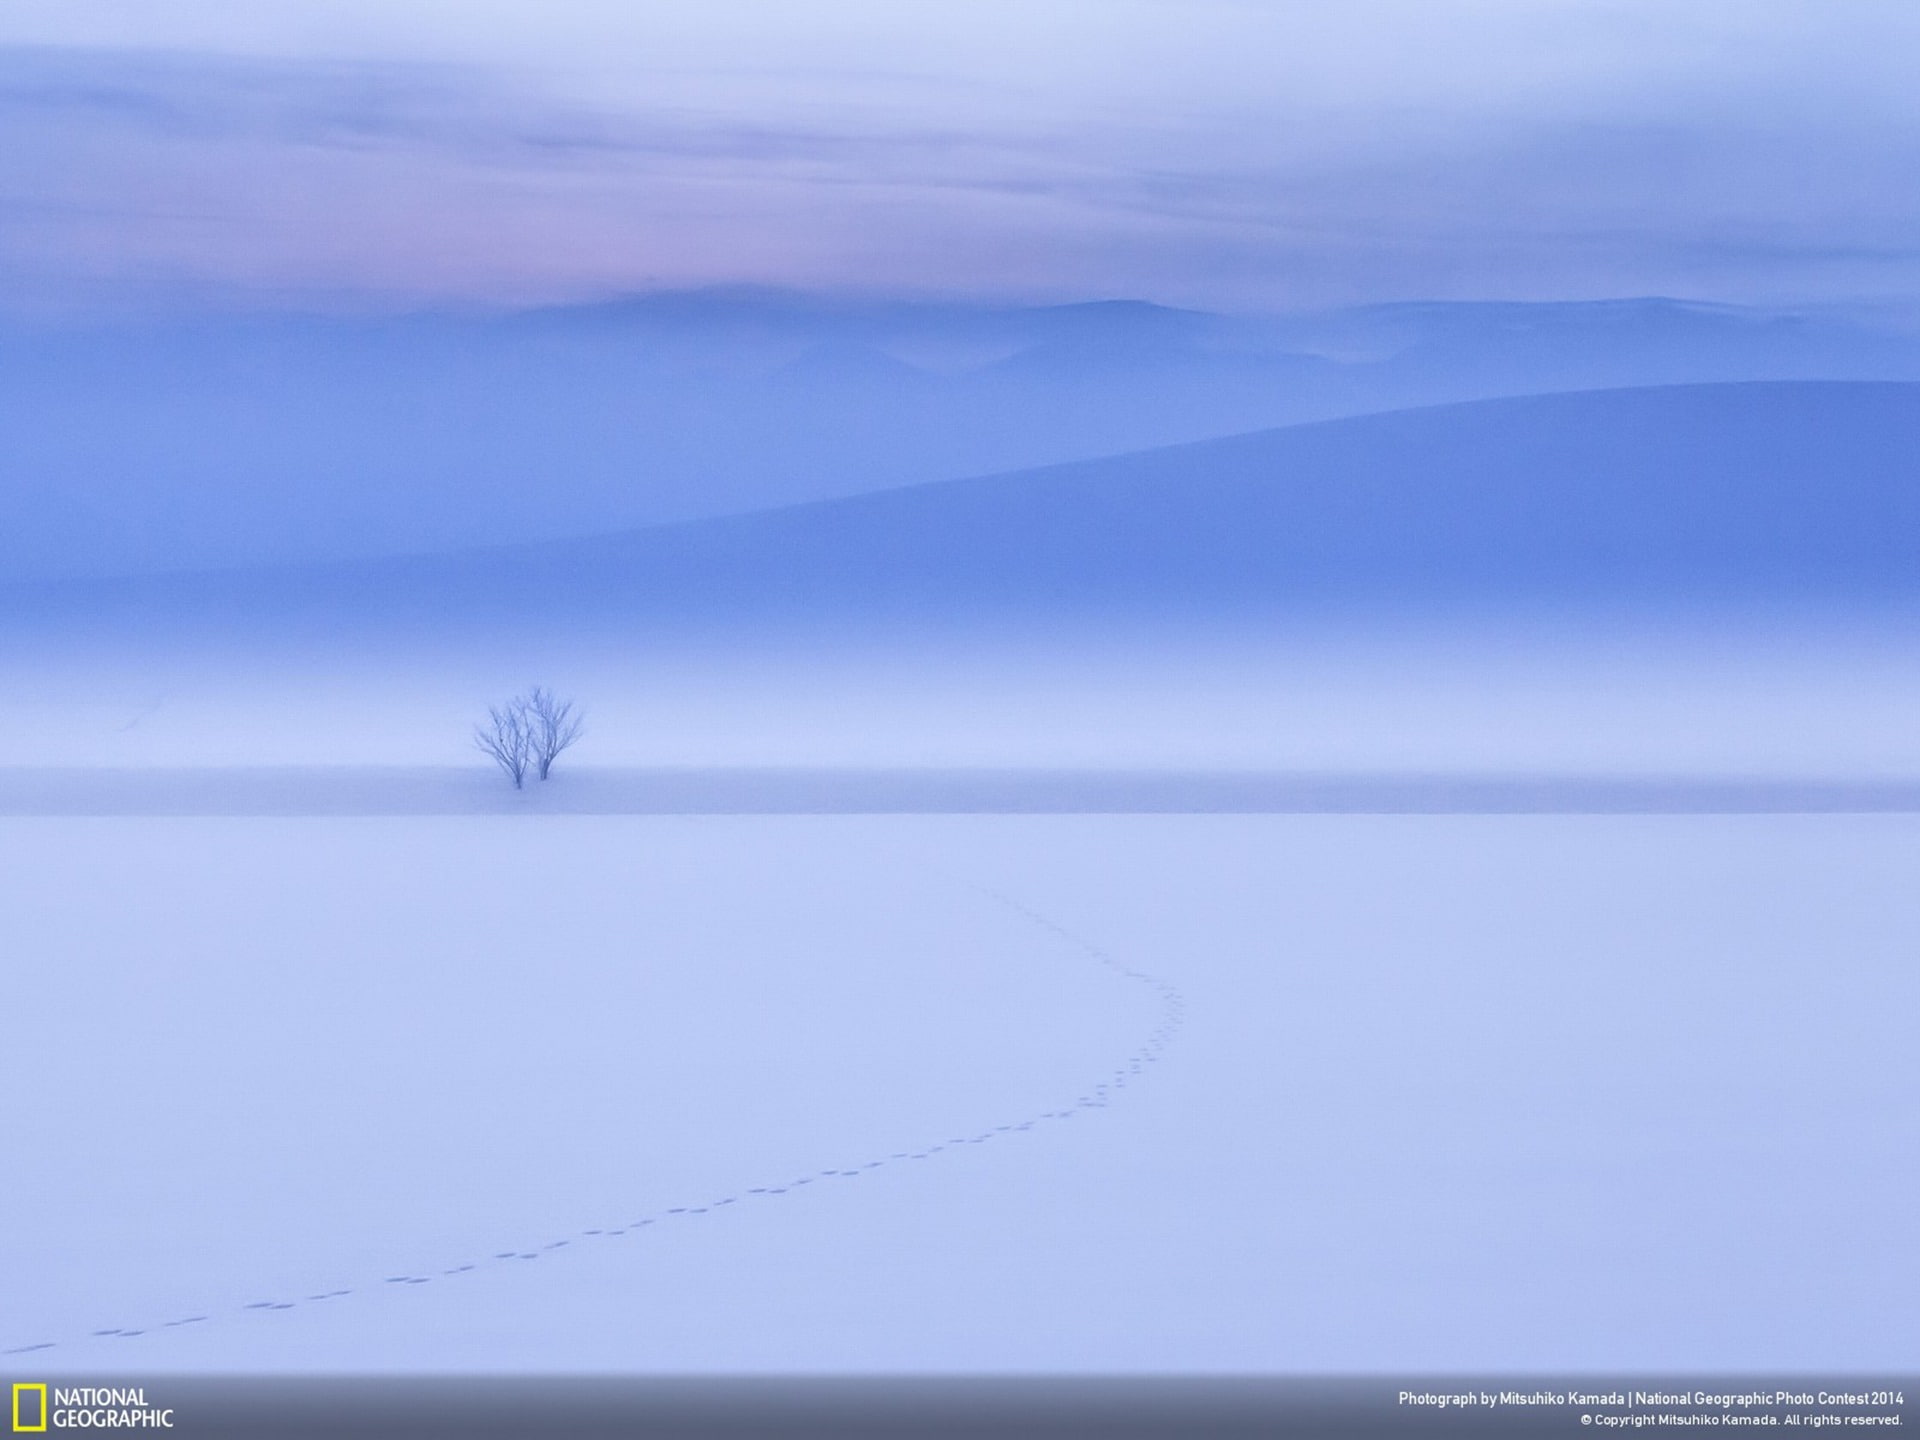 Biei Hokkaido JAPAN-National Geographic Wallpaper, snow covered ground under clouded sky National Geographic TV show still